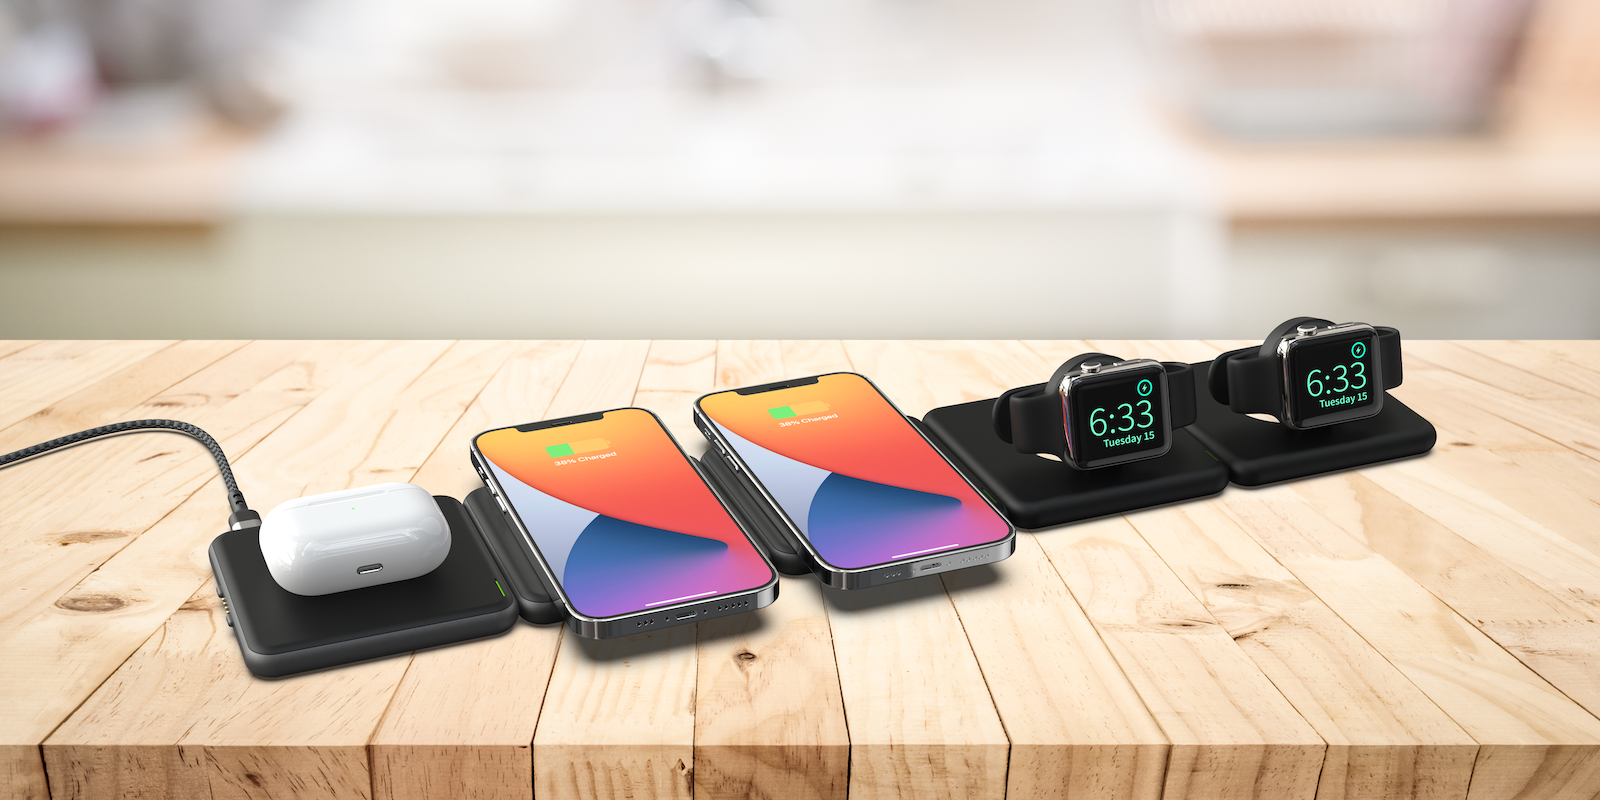 The Modula5 system provides wireless Qi charging for the devices YOU have, not the ones they want you to.